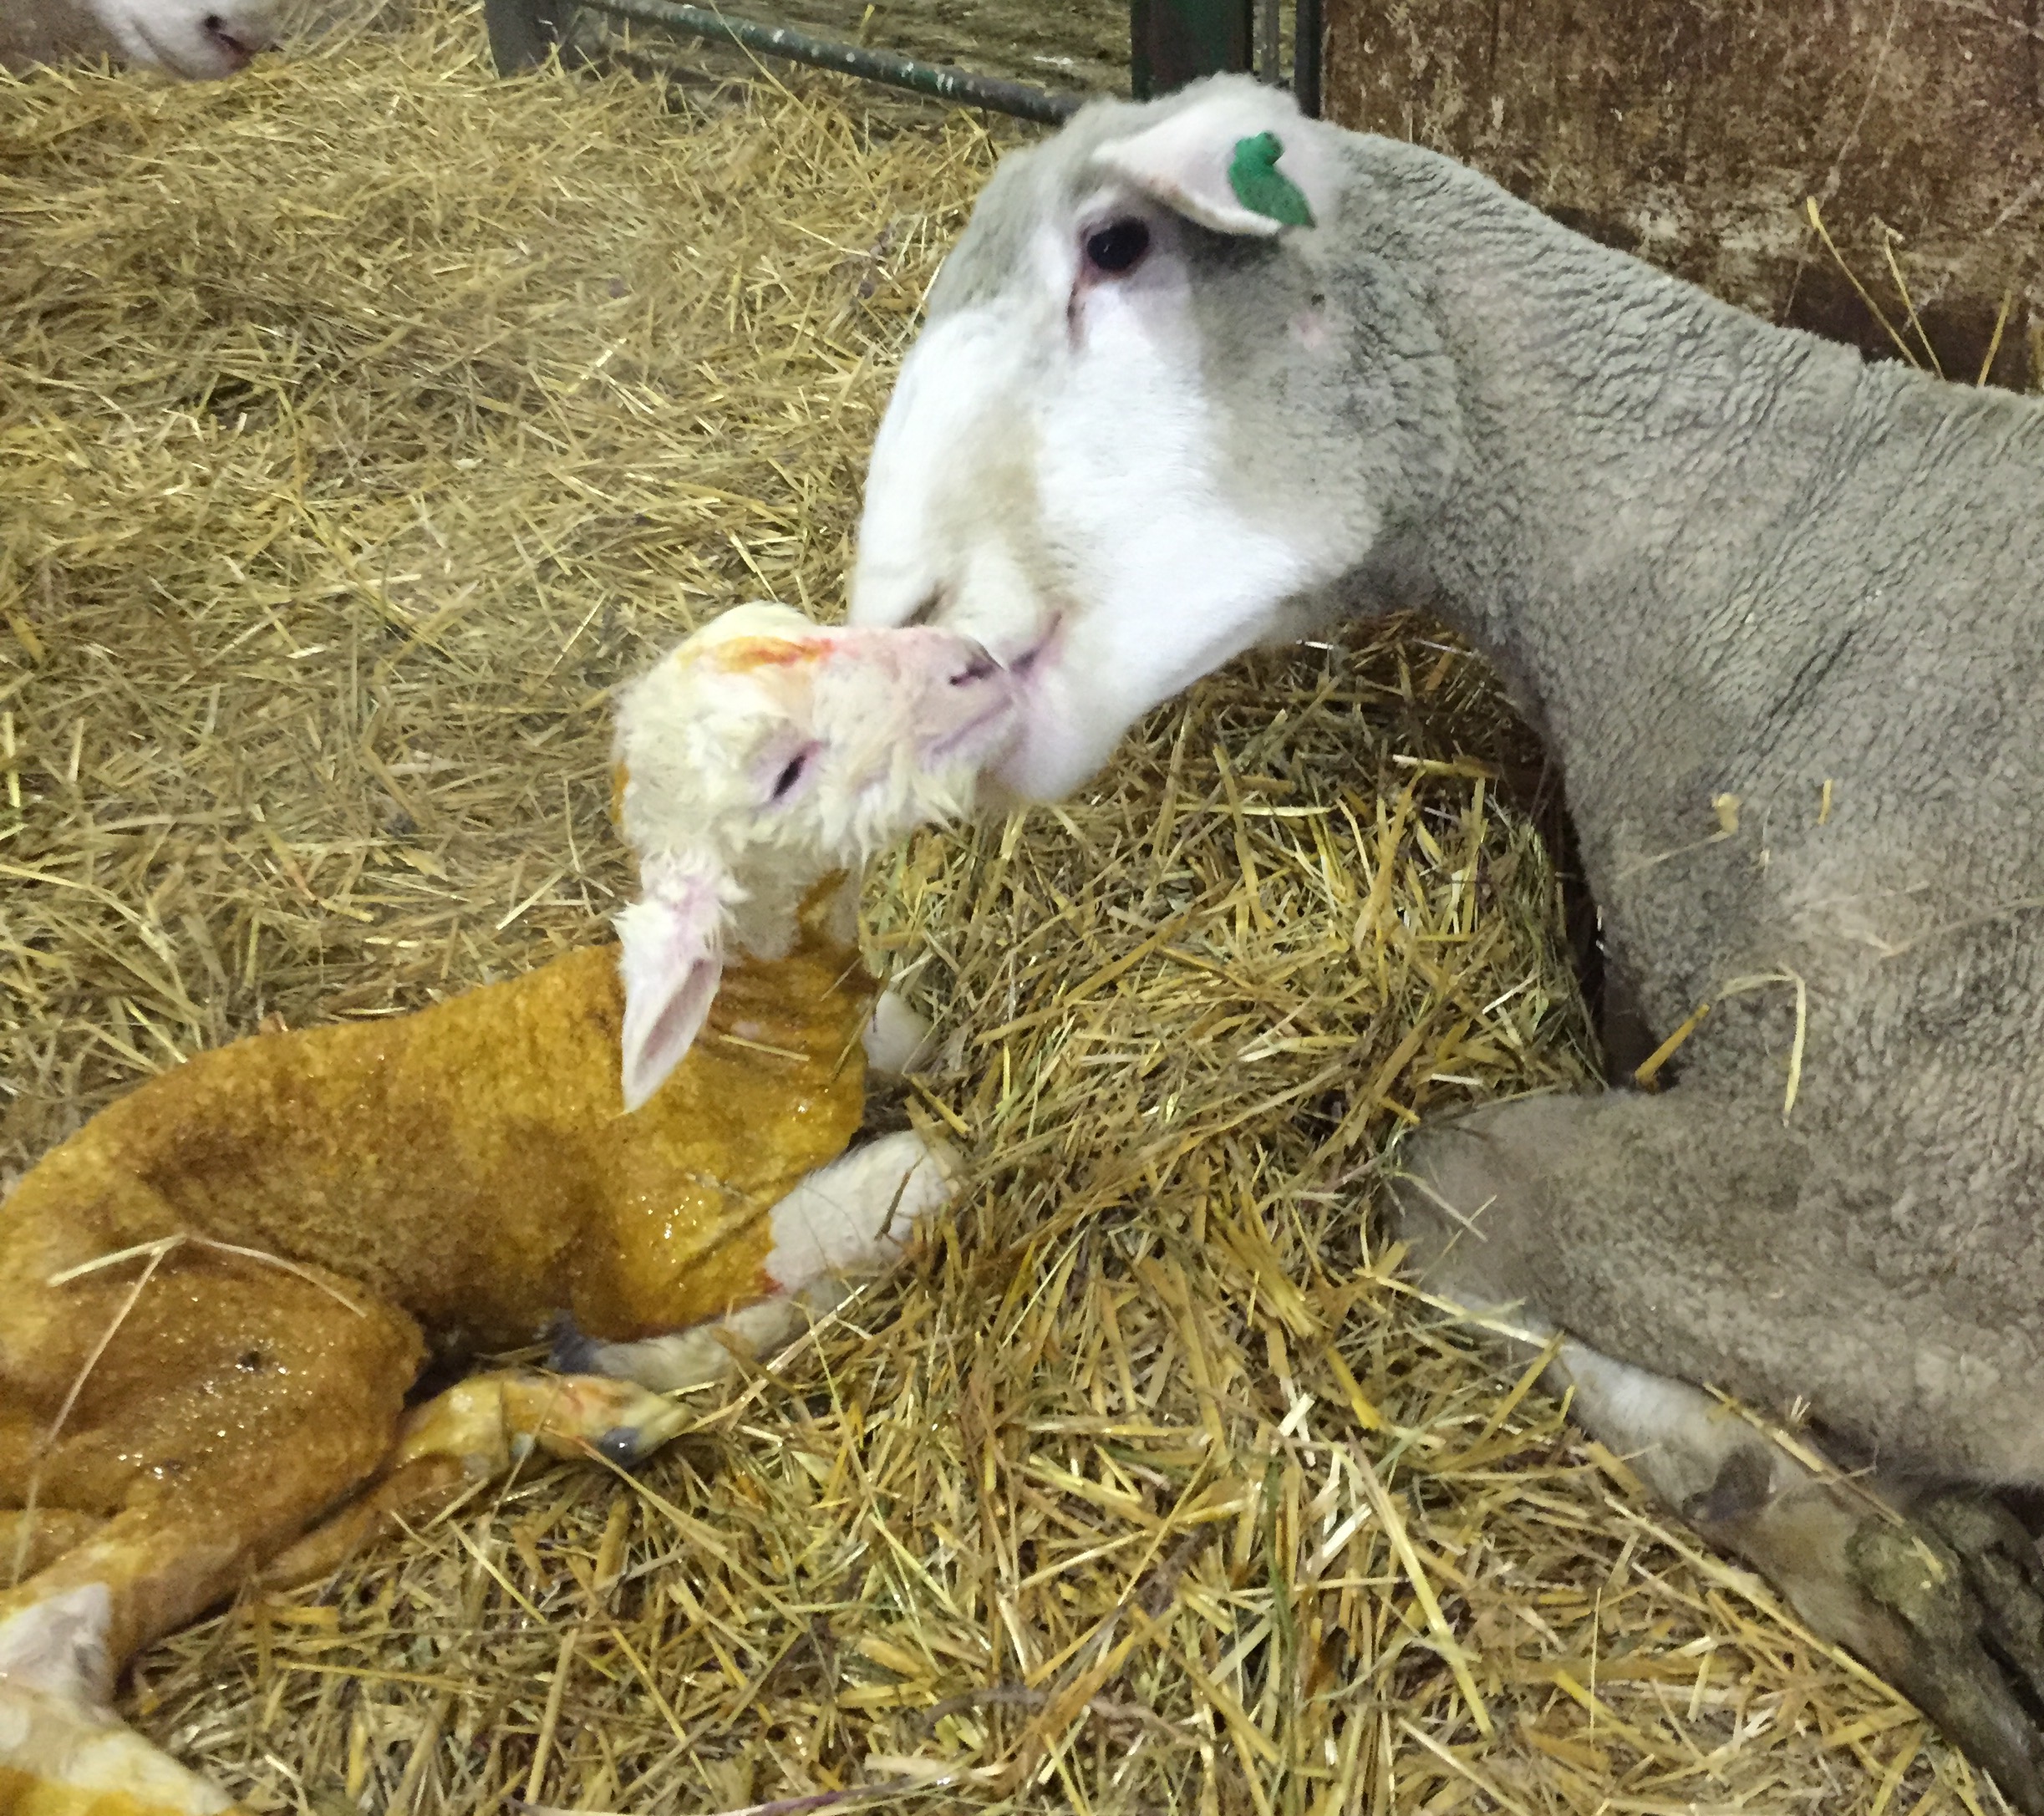 Being prepared for lambing can reduce producer stress and improve the sheep operation's success. (NDSU photo)